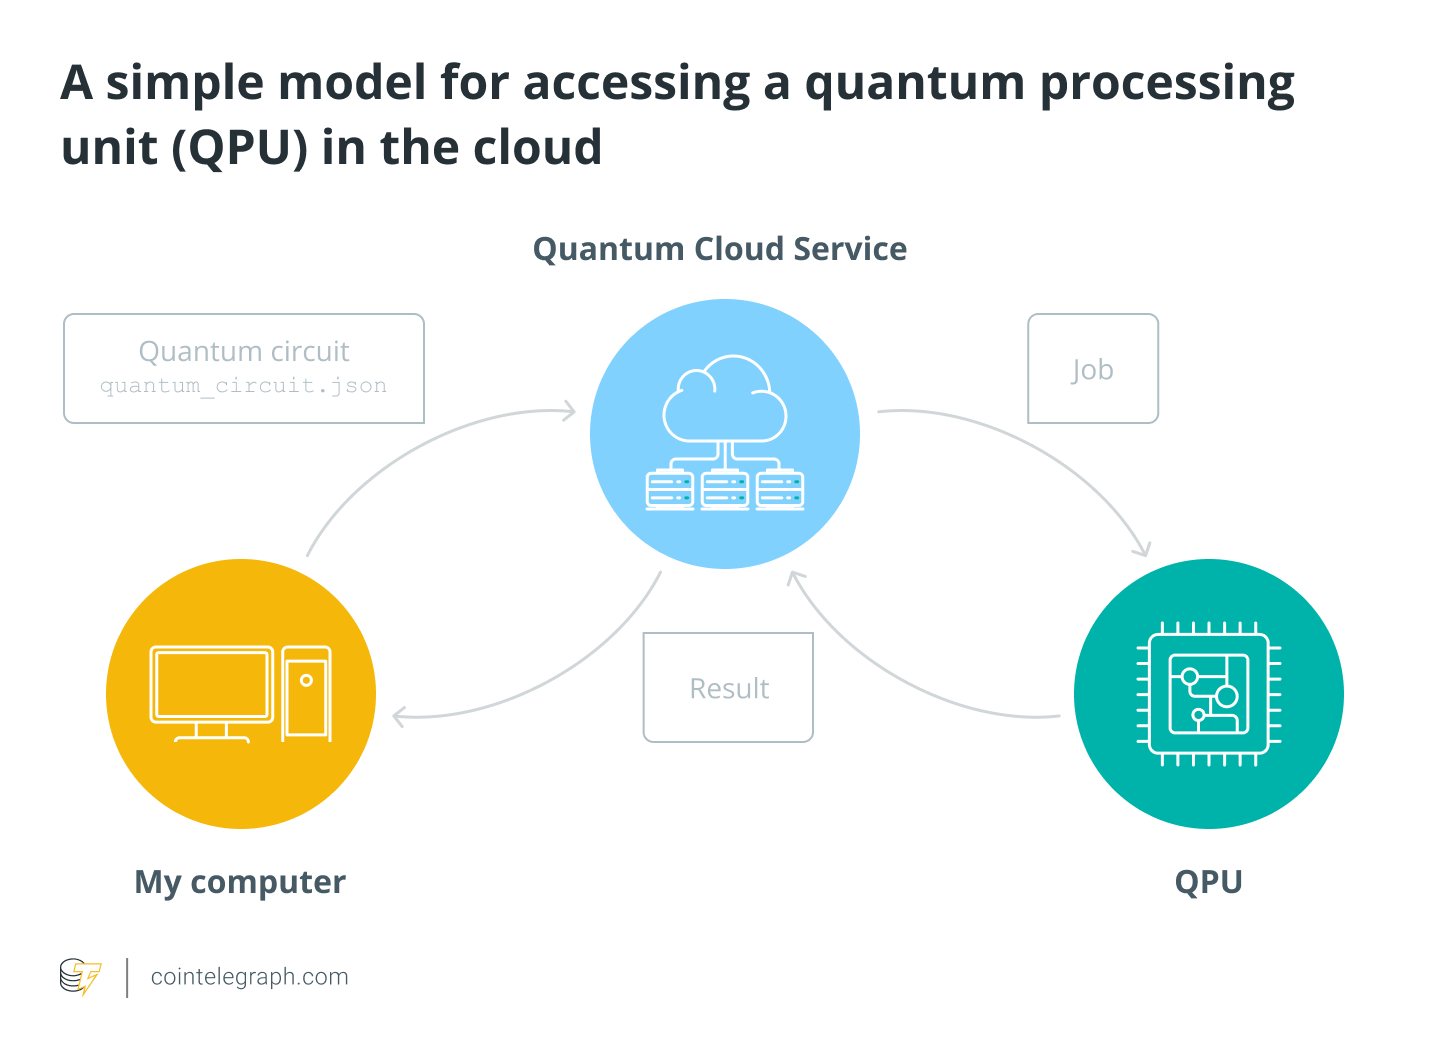 A simple model for accessing a quantum processing unit (QPU) in the cloud